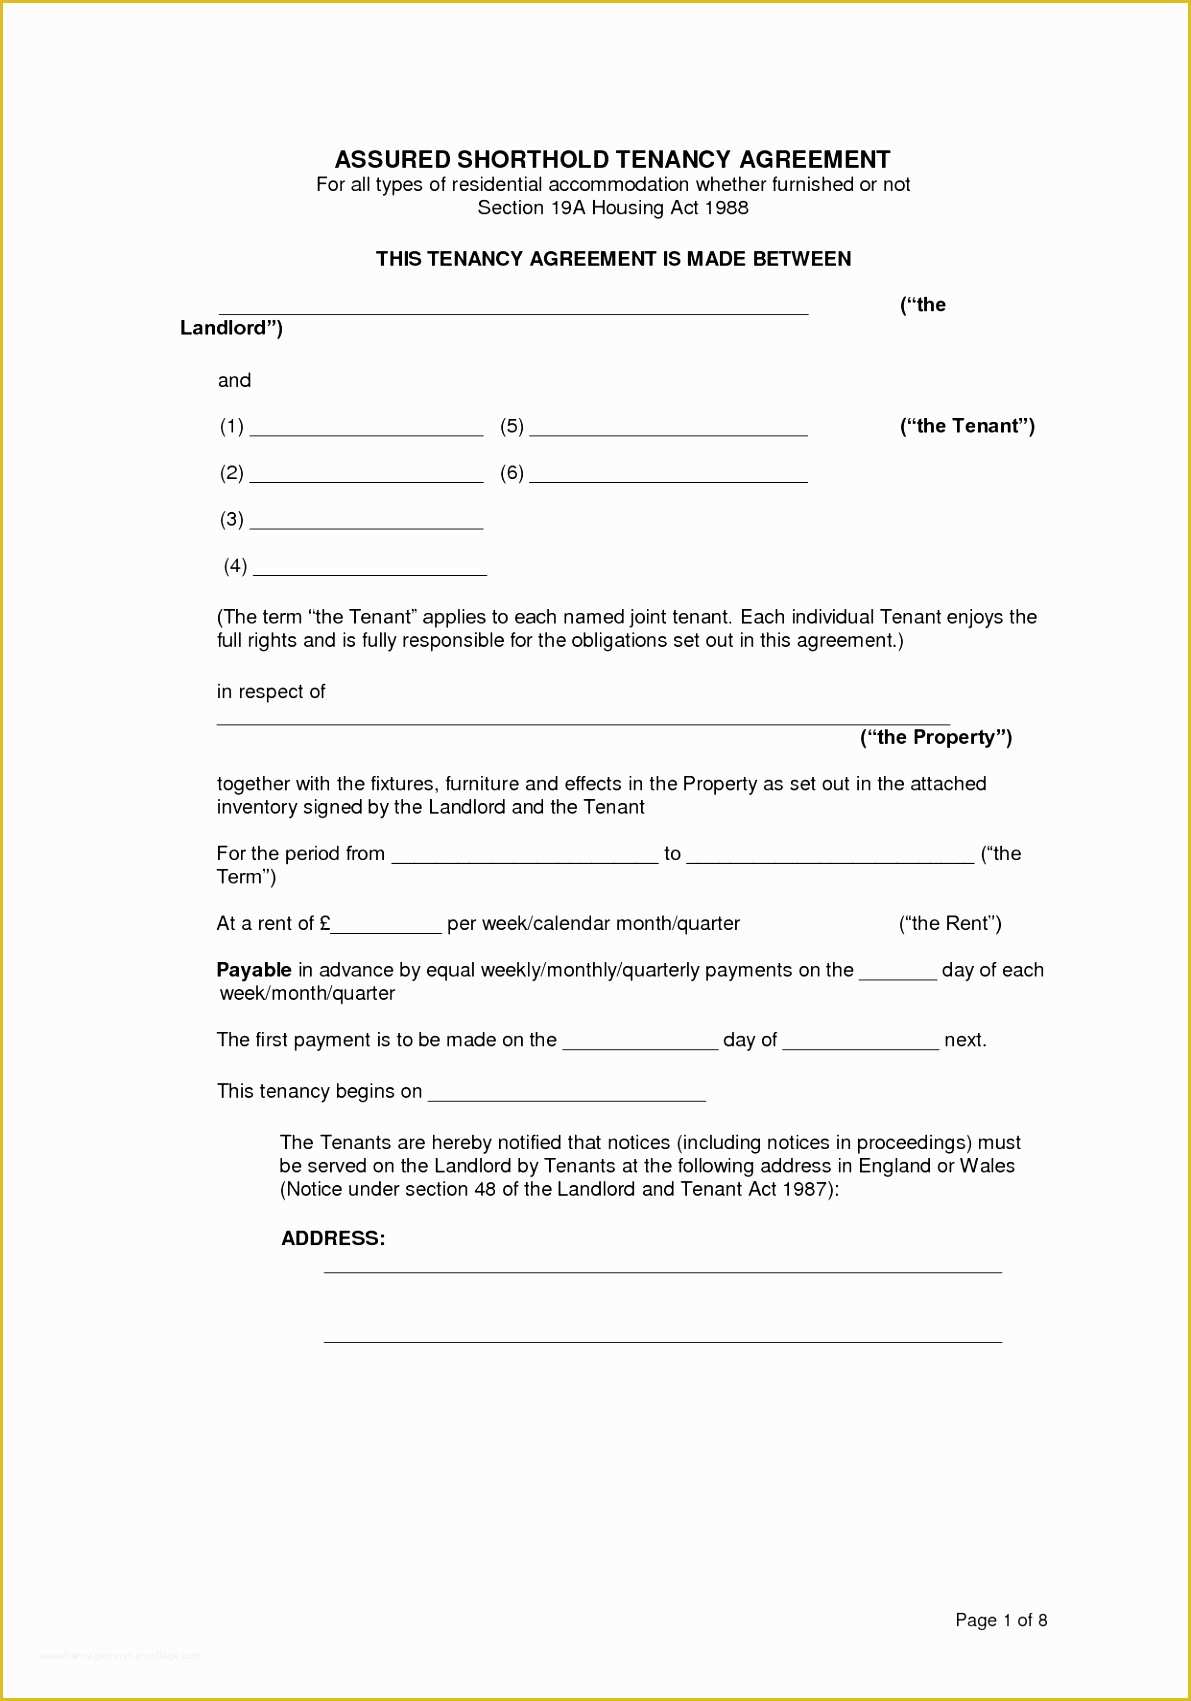 tenancy-agreement-form-template-free-of-9-ast-tenancy-agreement-template-rieta